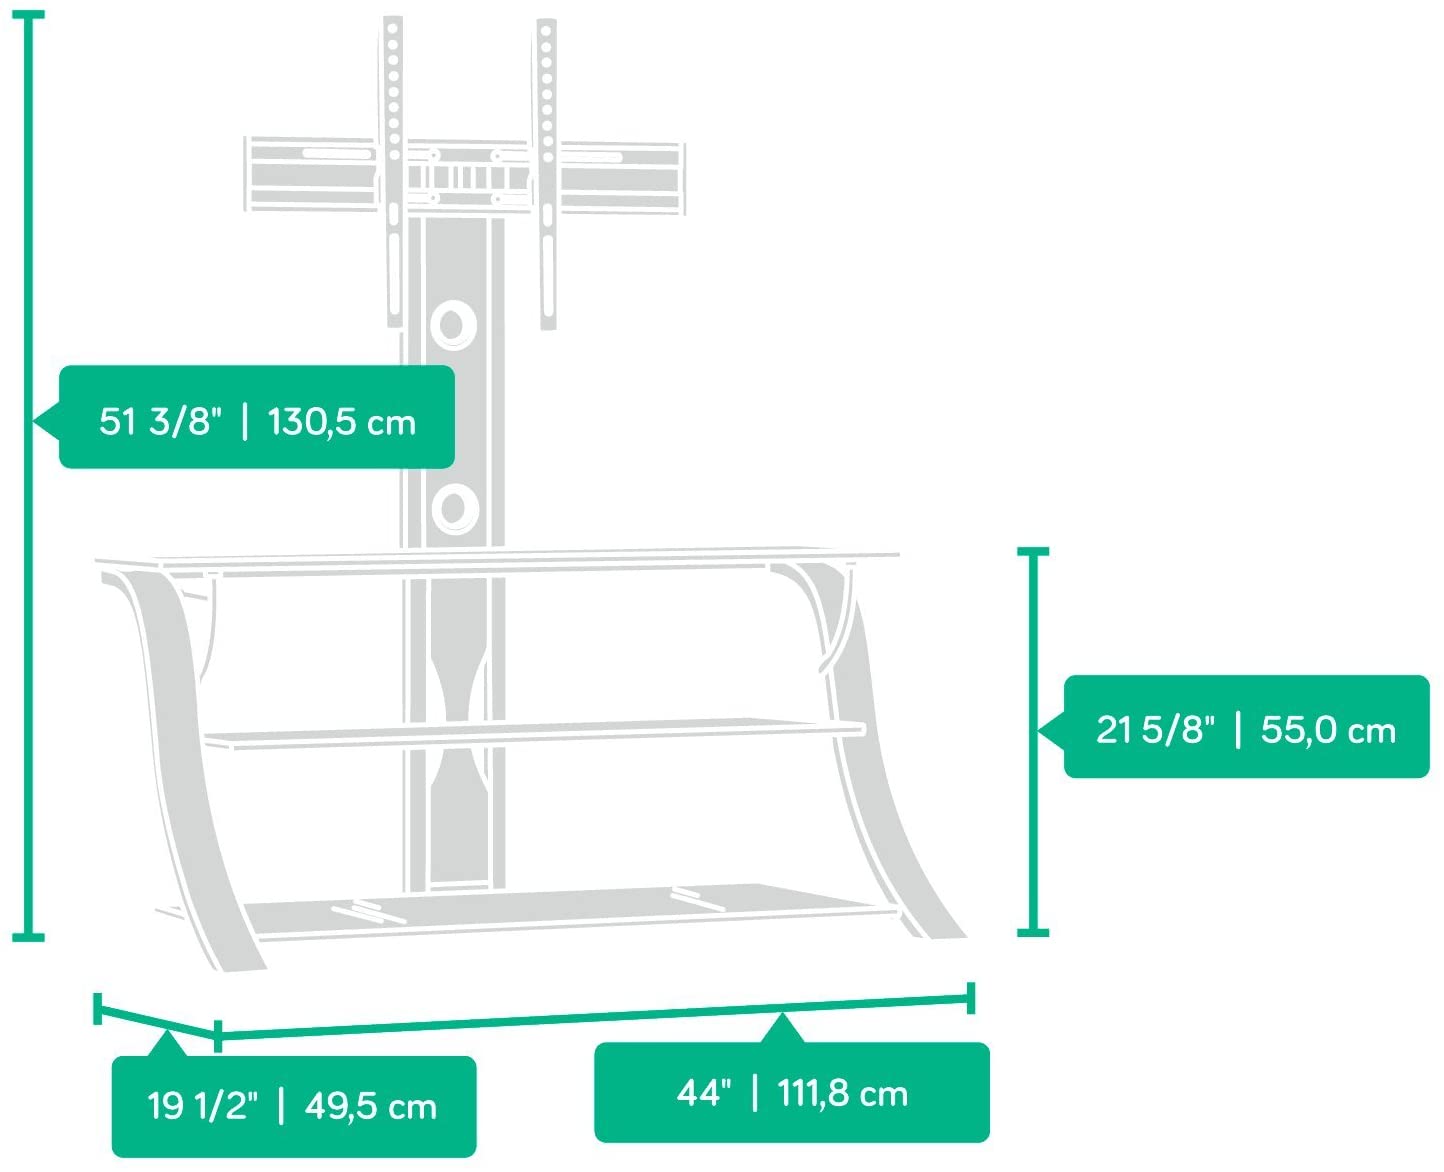 Veer Panel TV Stand with TV Mount